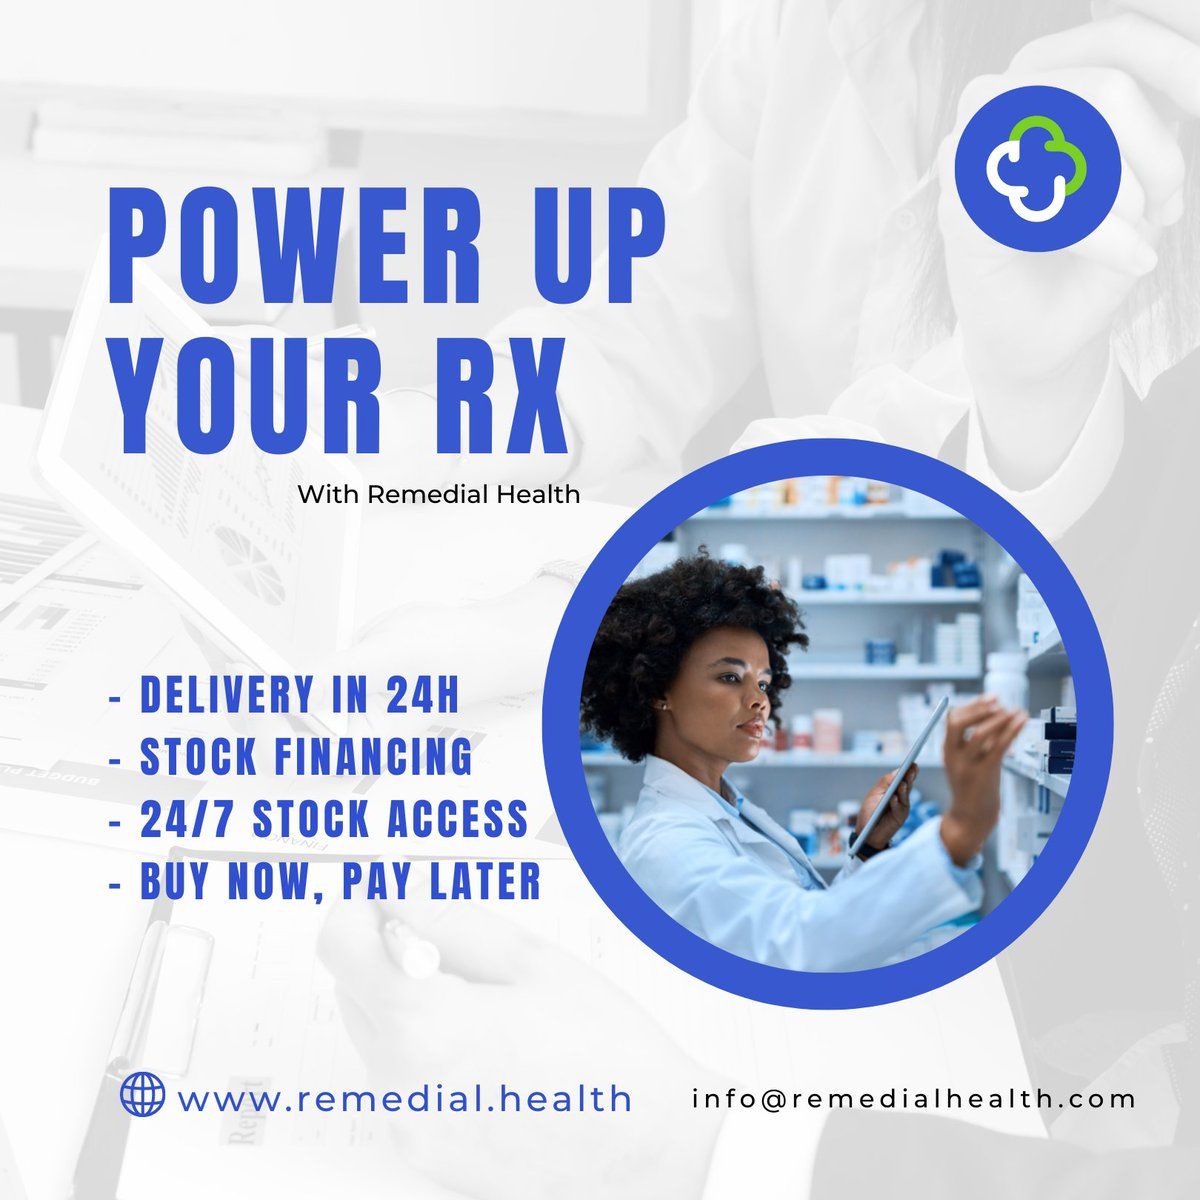 Remedial Health Enables Buy-Now-Pay later Policy To Maximize Sales Opportunity